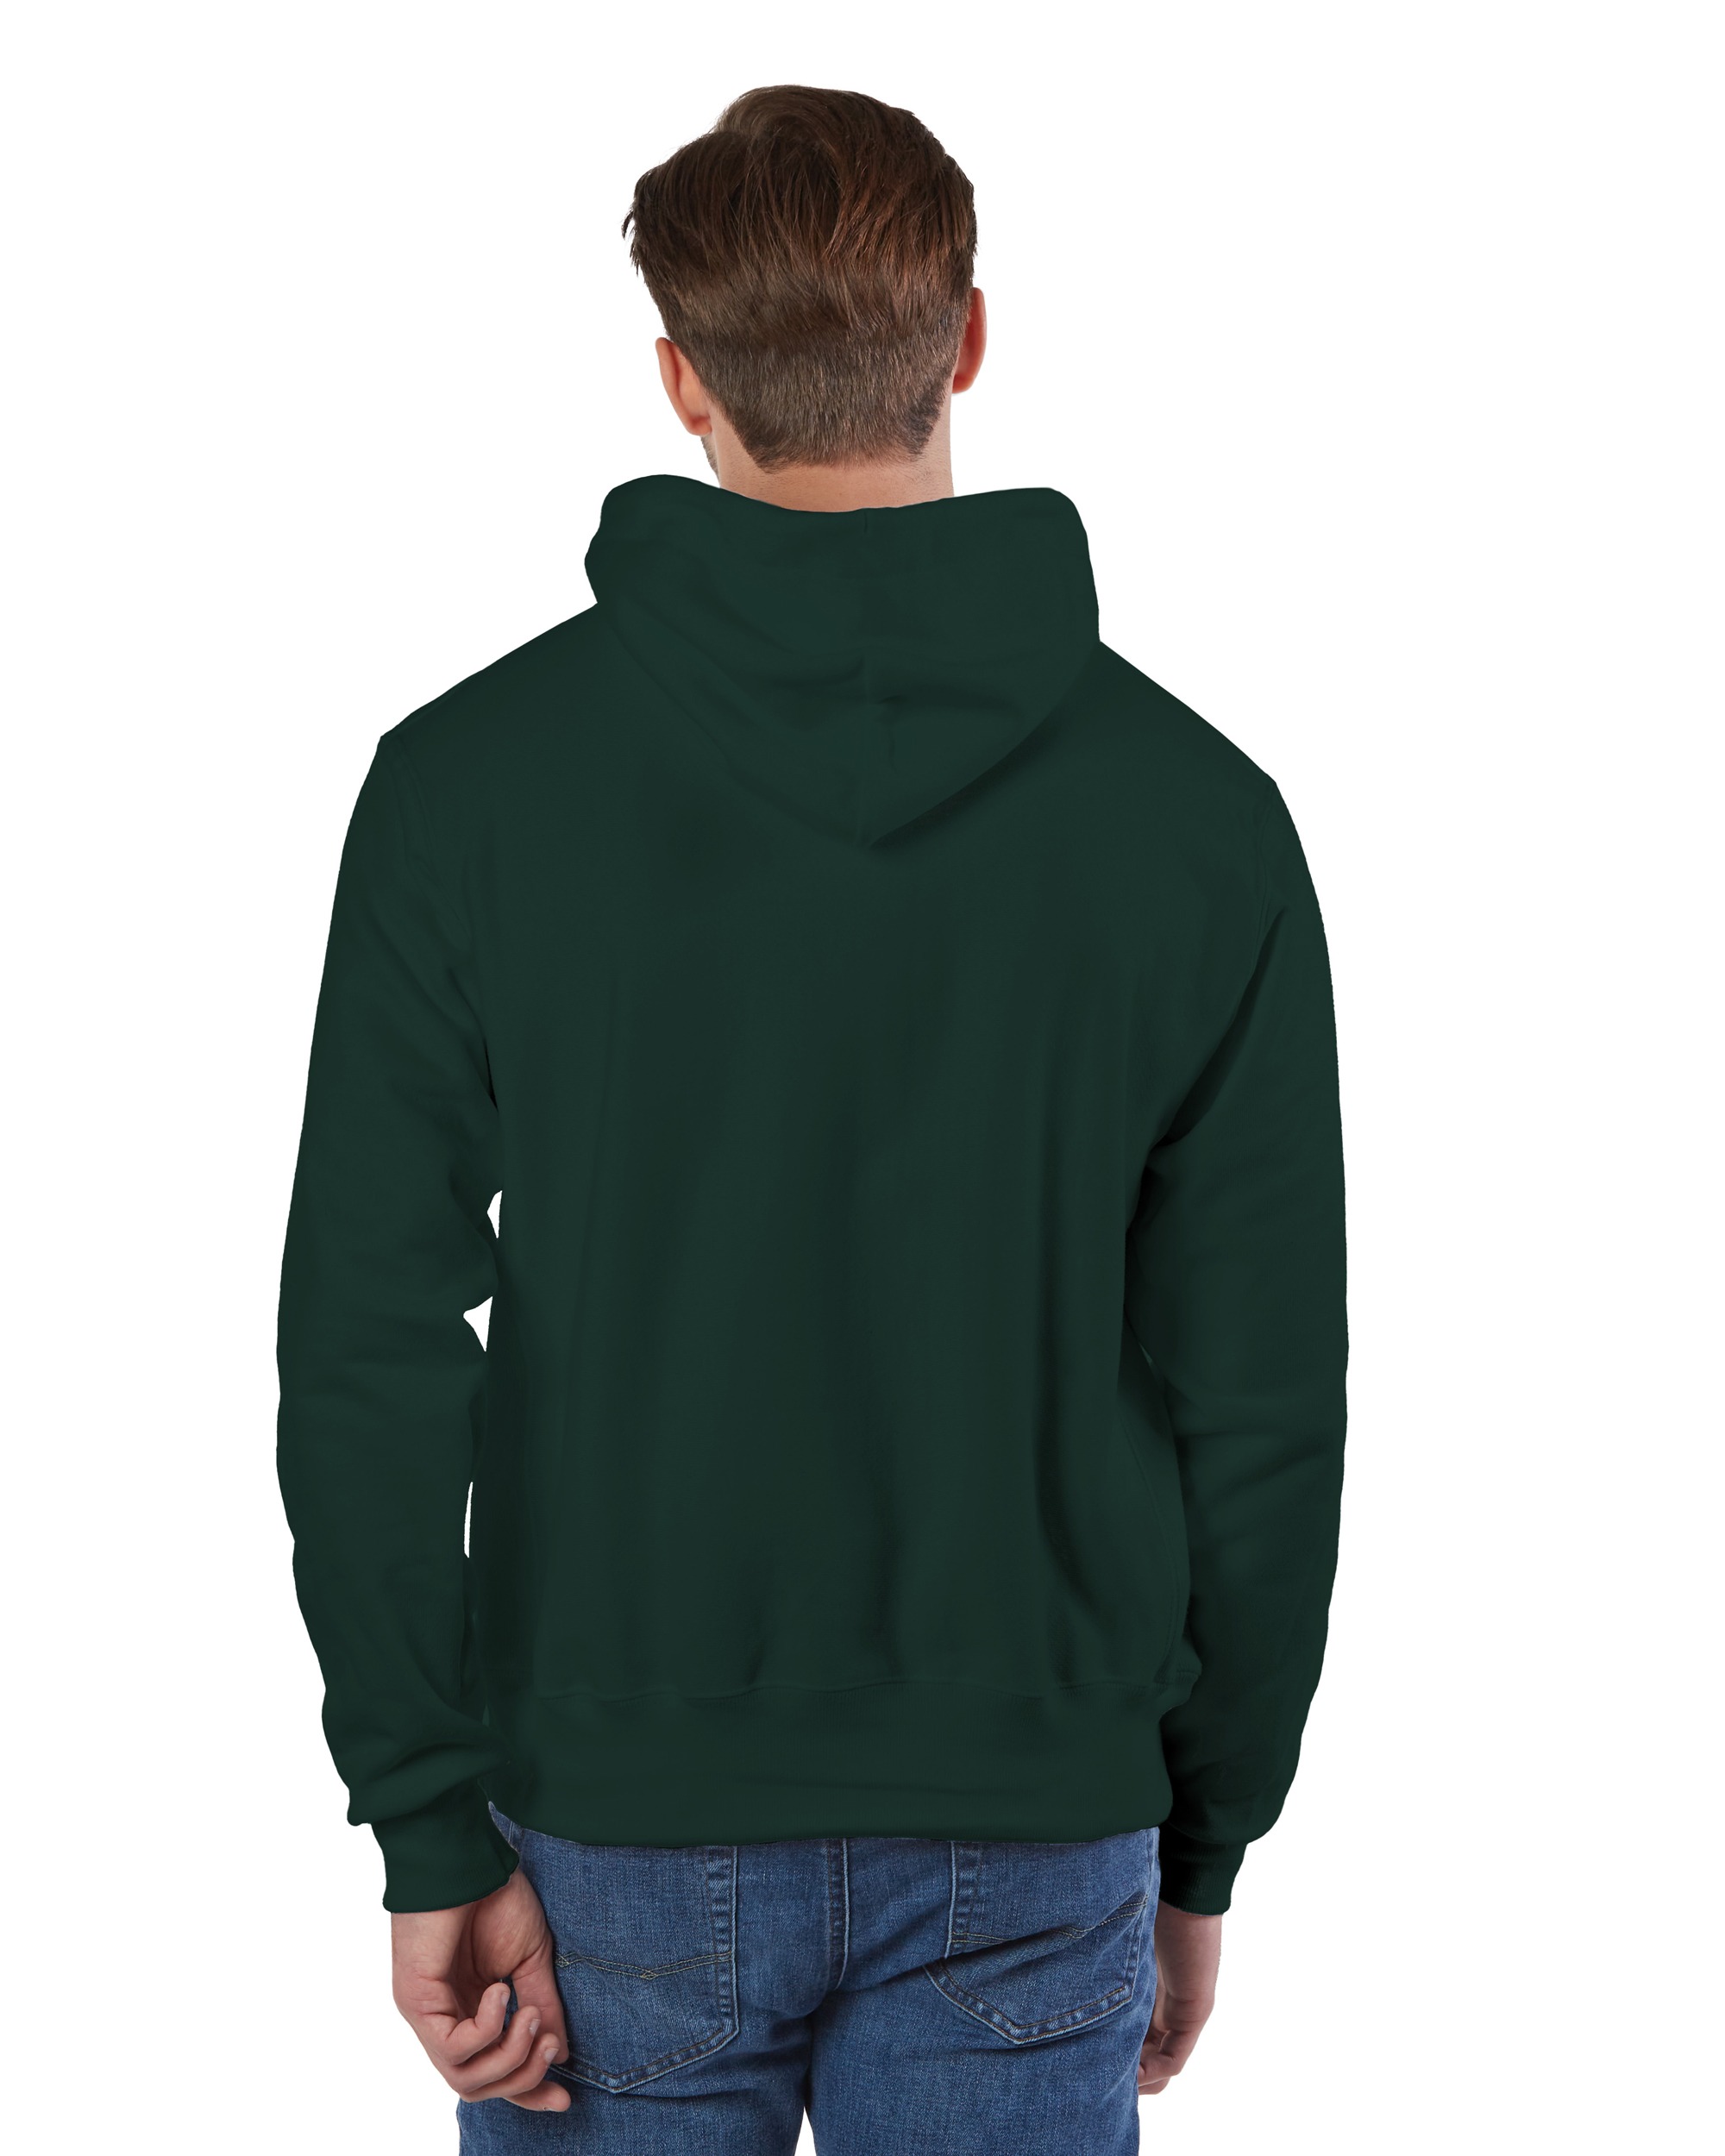 CN370 - Reverse Weave® Pullover Hood - One Stop